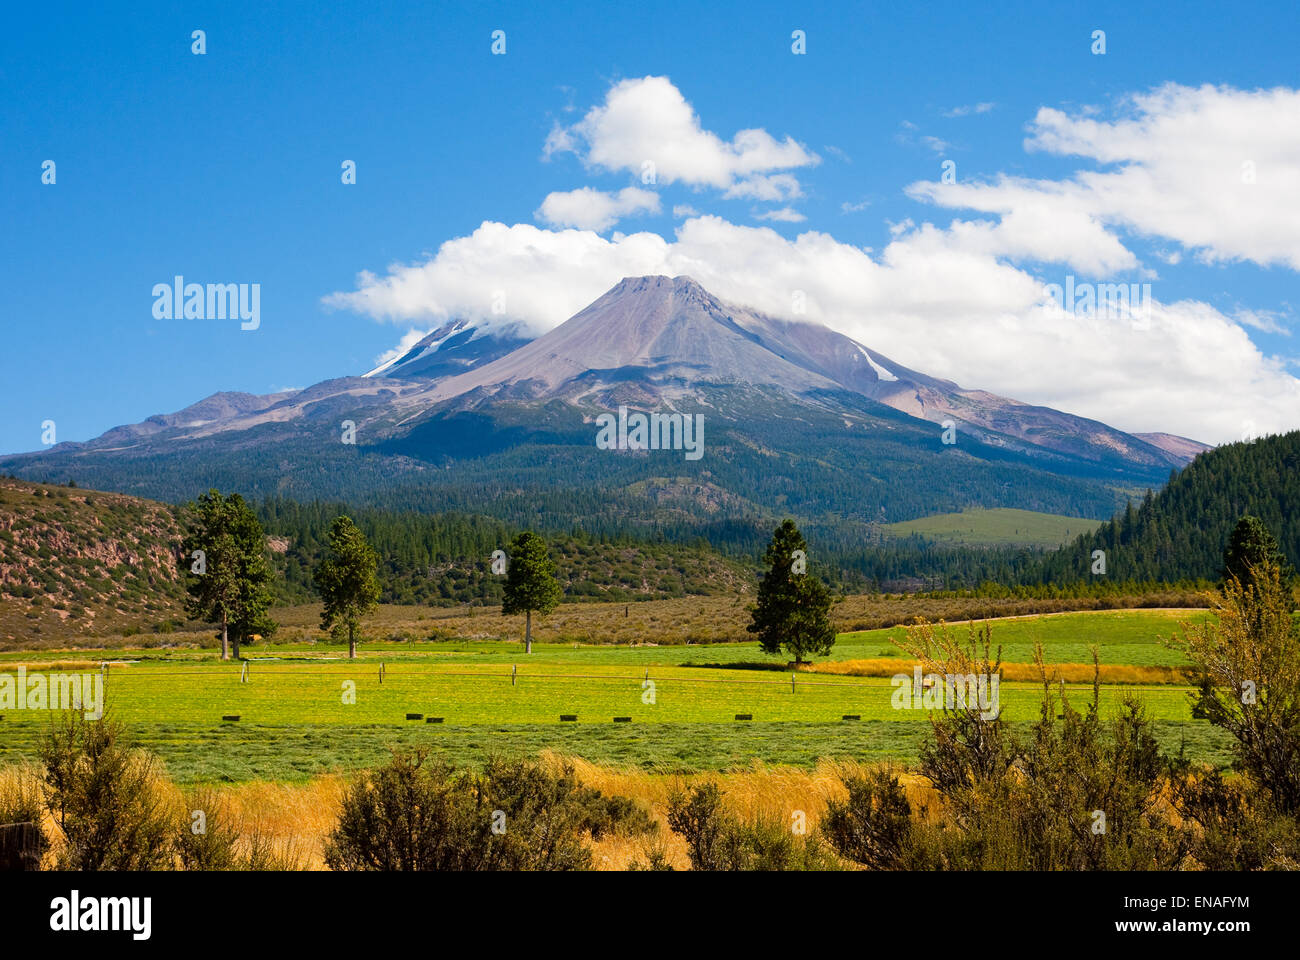 Clouds on top of Mount Shasta, California Stock Photo